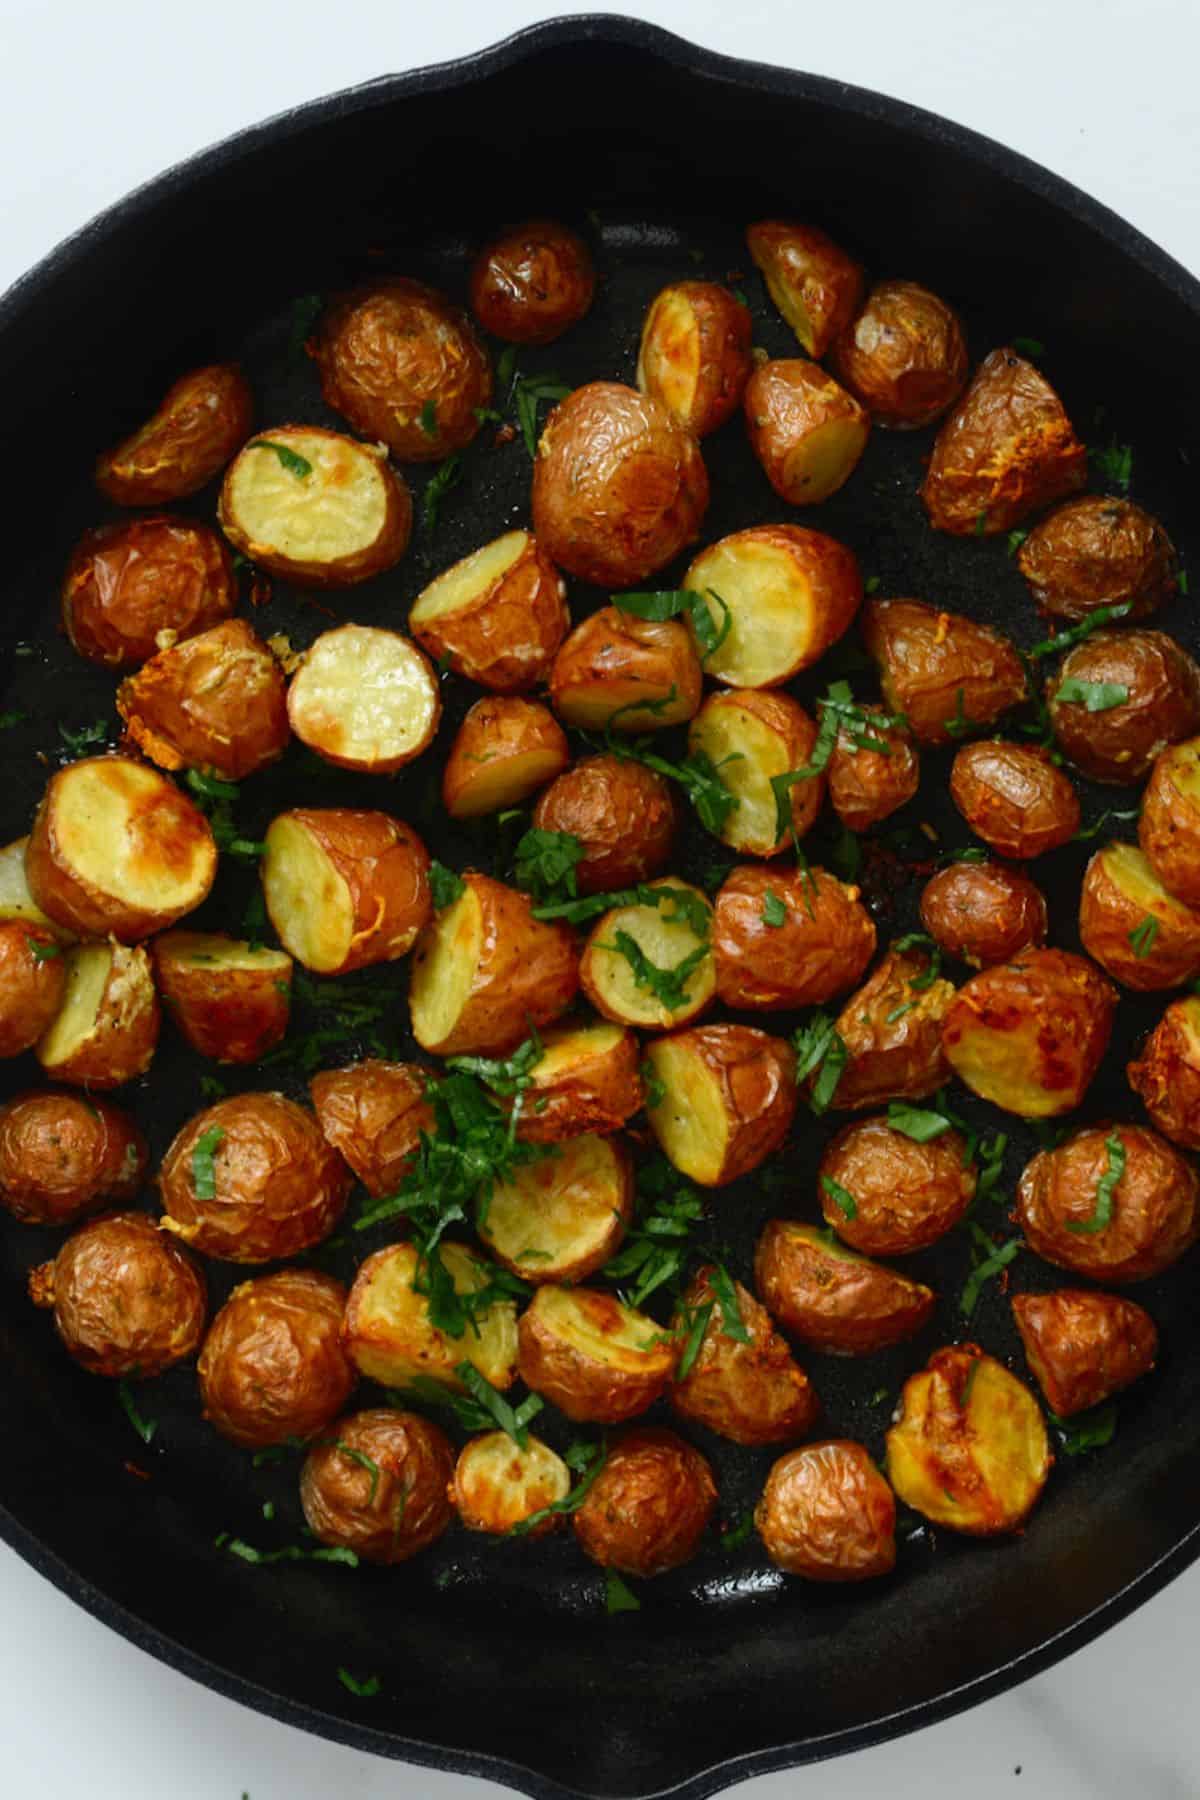 Roasted new potatoes in a pan